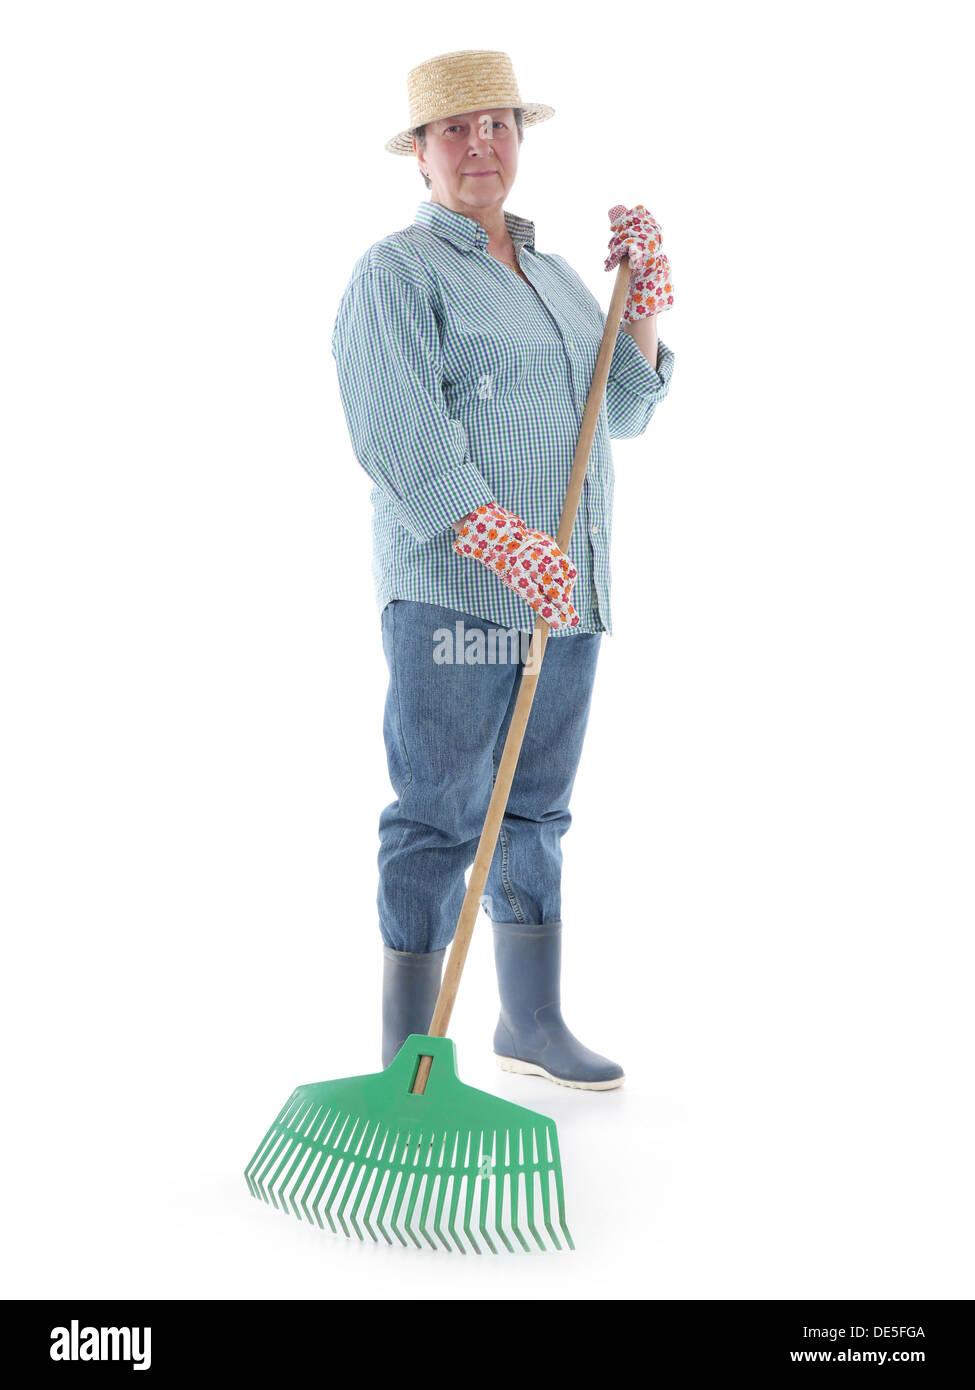 Senior woman gardener wearing straw hat and rubber boots posing with plastic lawn rake over white background Stock Photo